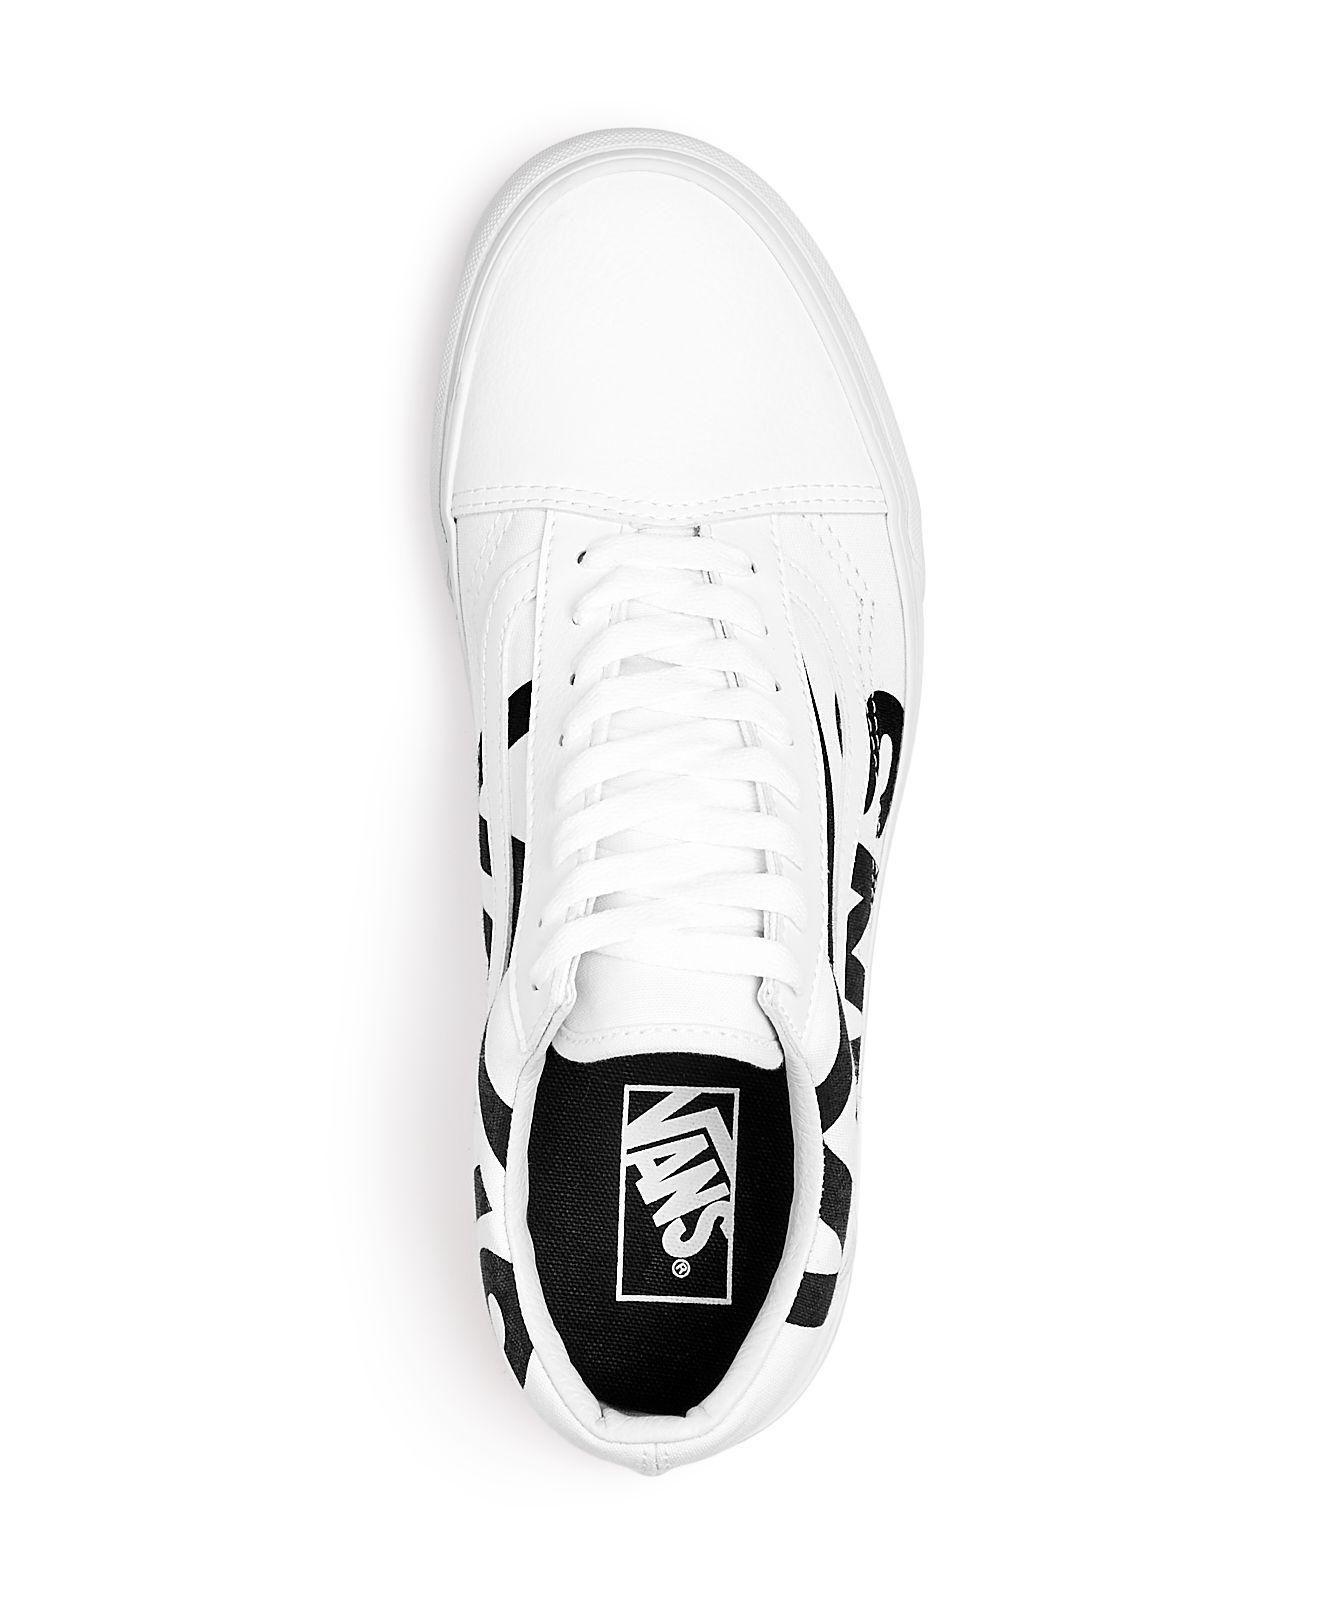 Leather Vans Logo - Vans Men's Old Skool Logo Canvas & Leather Lace Up Sneakers in White